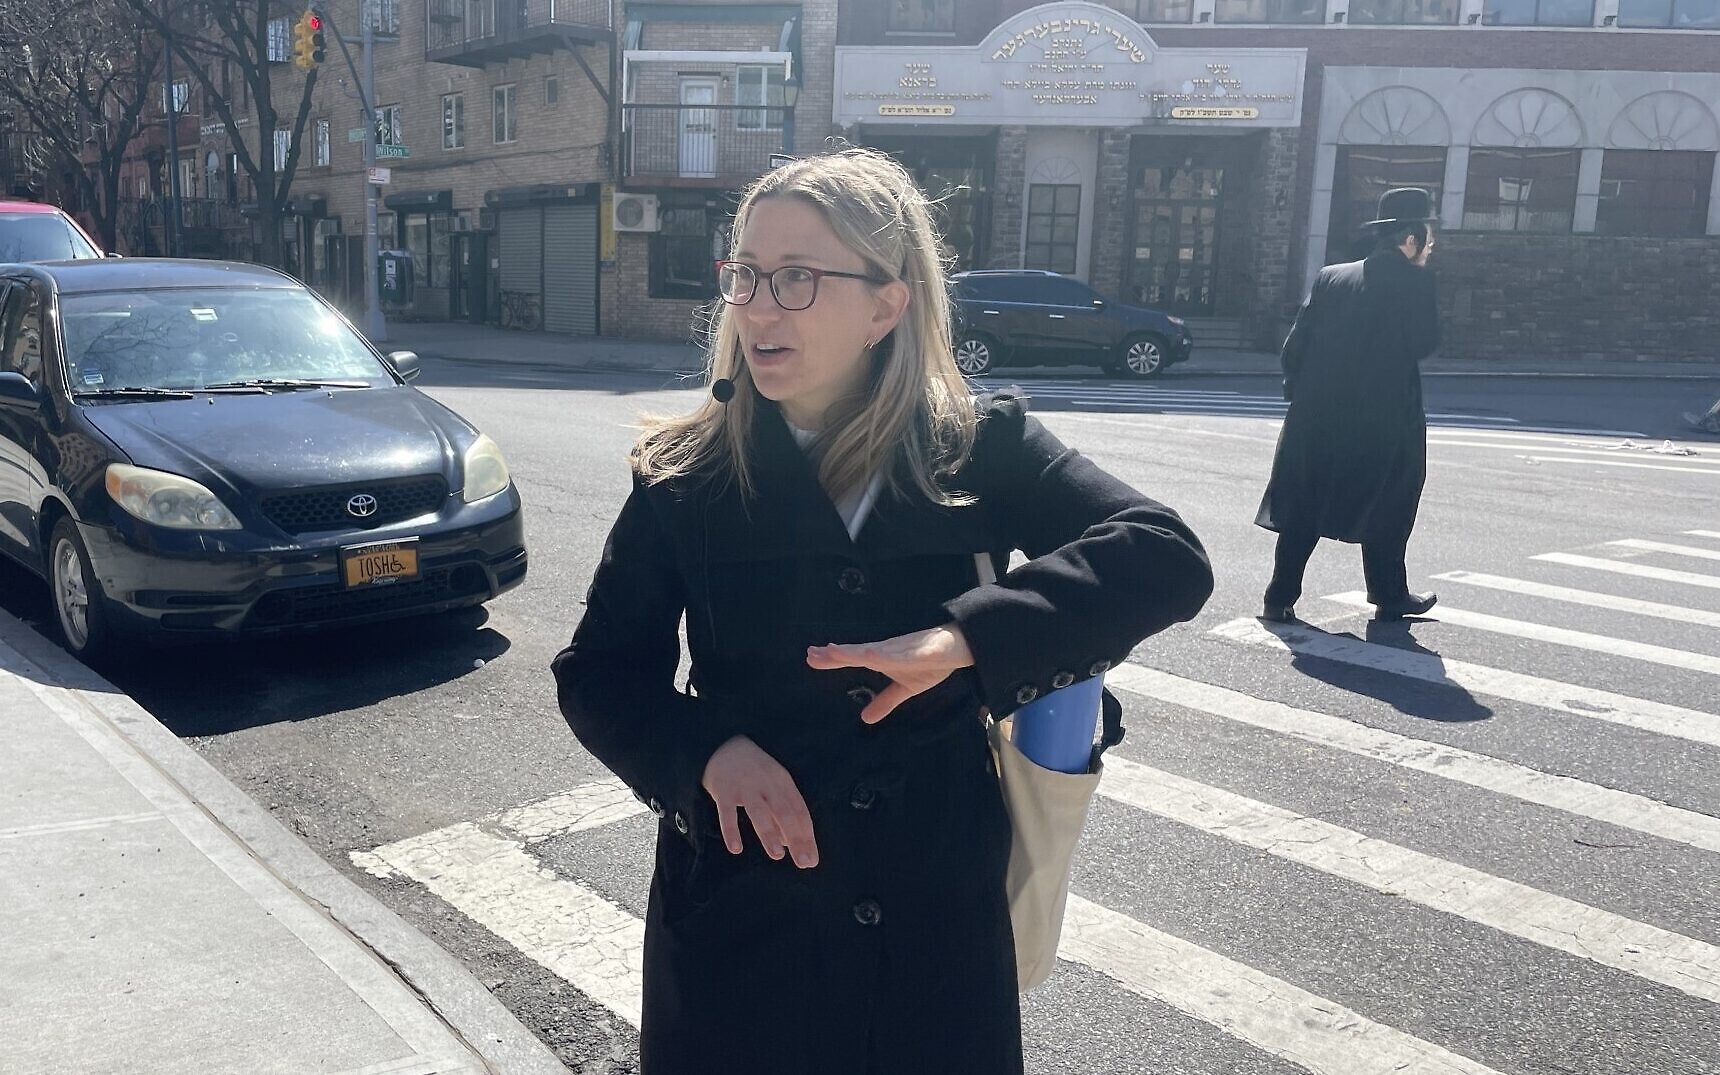 Tour guide finds new way to show people around New York City during  COVID-19 pandemic